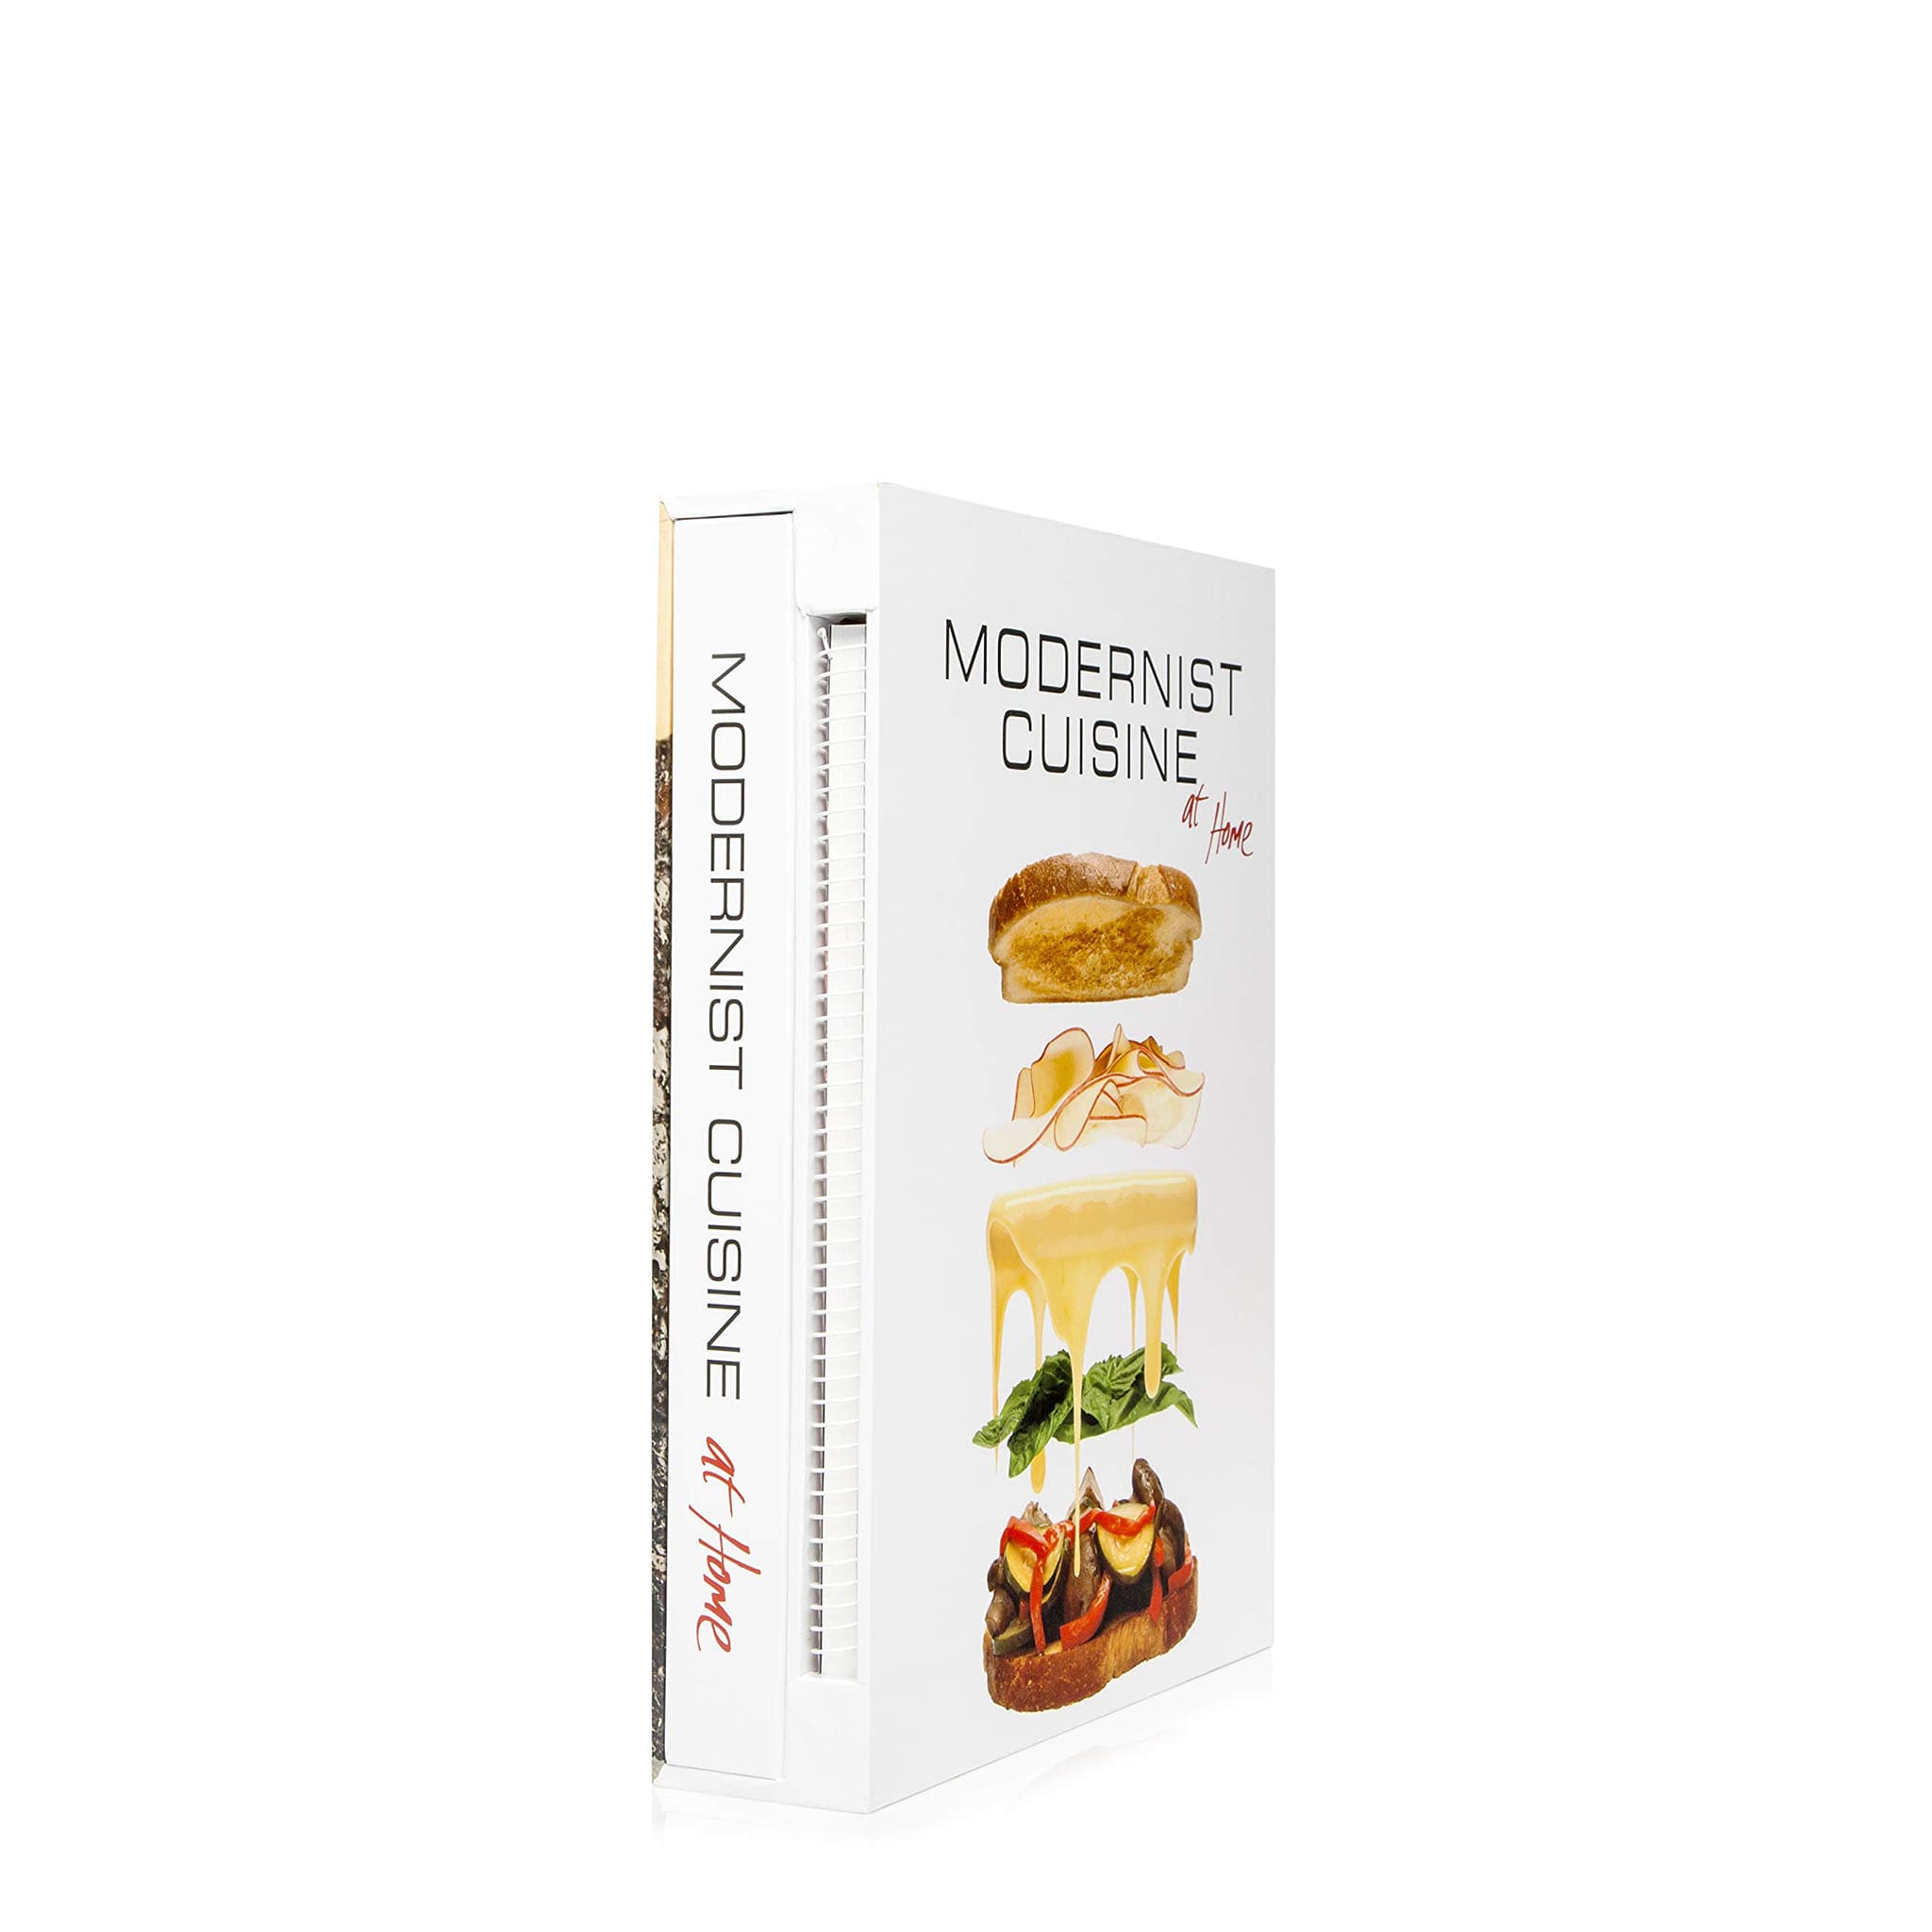 Modernist Cuisine At Home by Nathan Myhrvold & Maxime Bilet